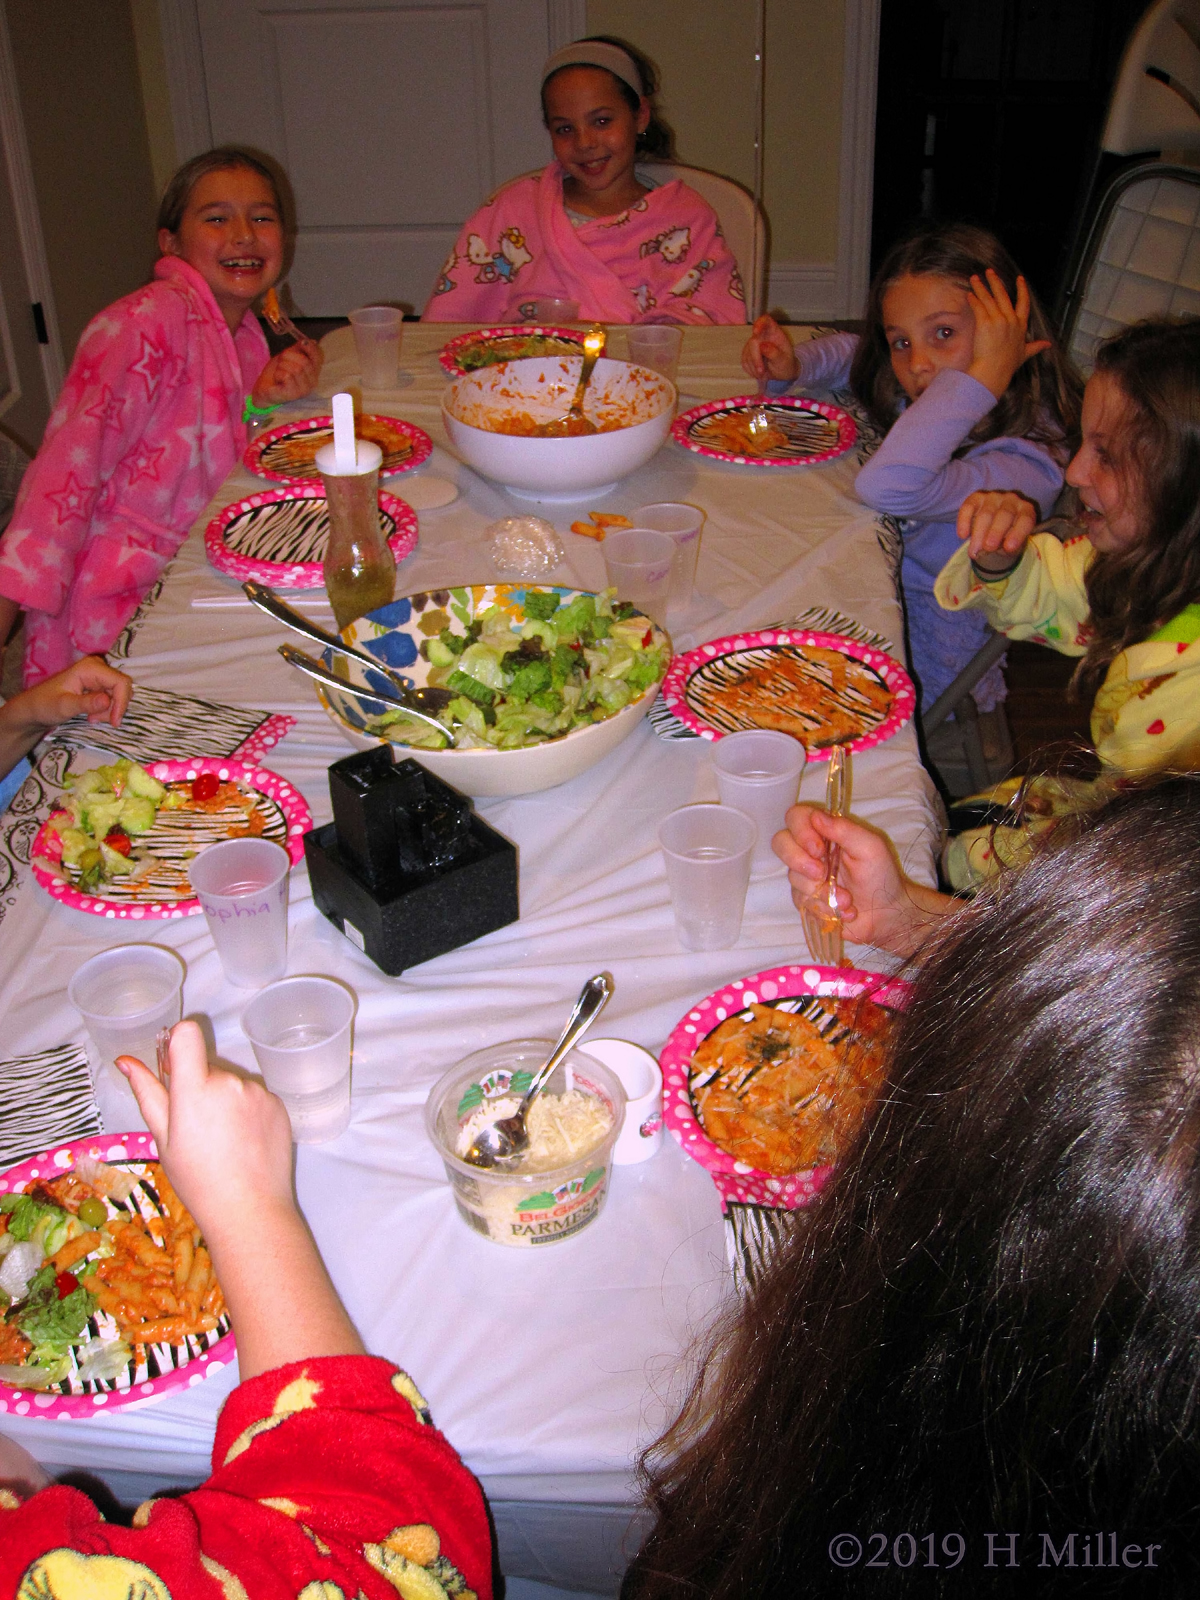 Meal Time! Party Guests Enjoy Their Pasta And Salad! 